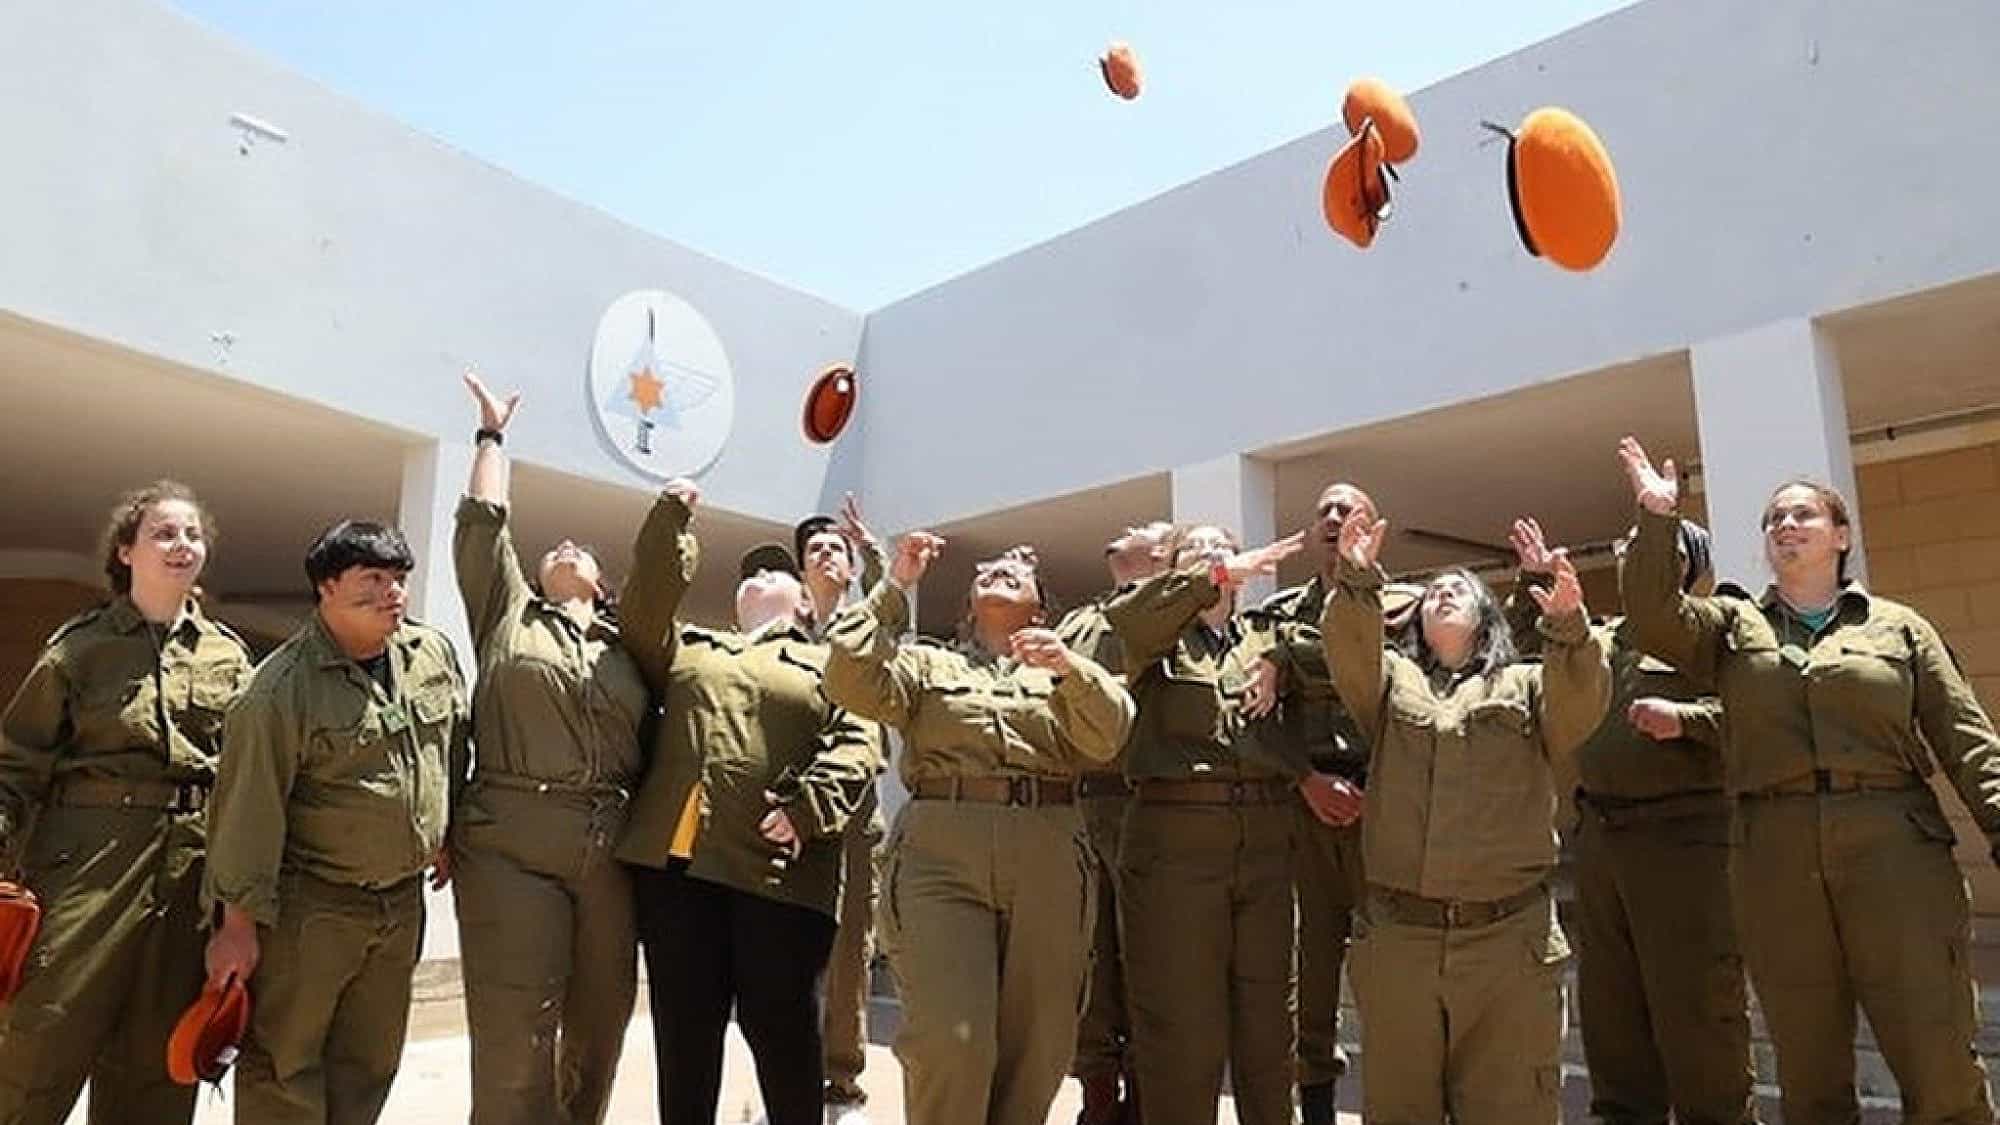 Volunteers from the Special In Uniform program celebrate after completing their "Beret March" at the beginning of their voluntary service in the Israel Defense Forces. Photo by Dani Rife/Special In Uniform.